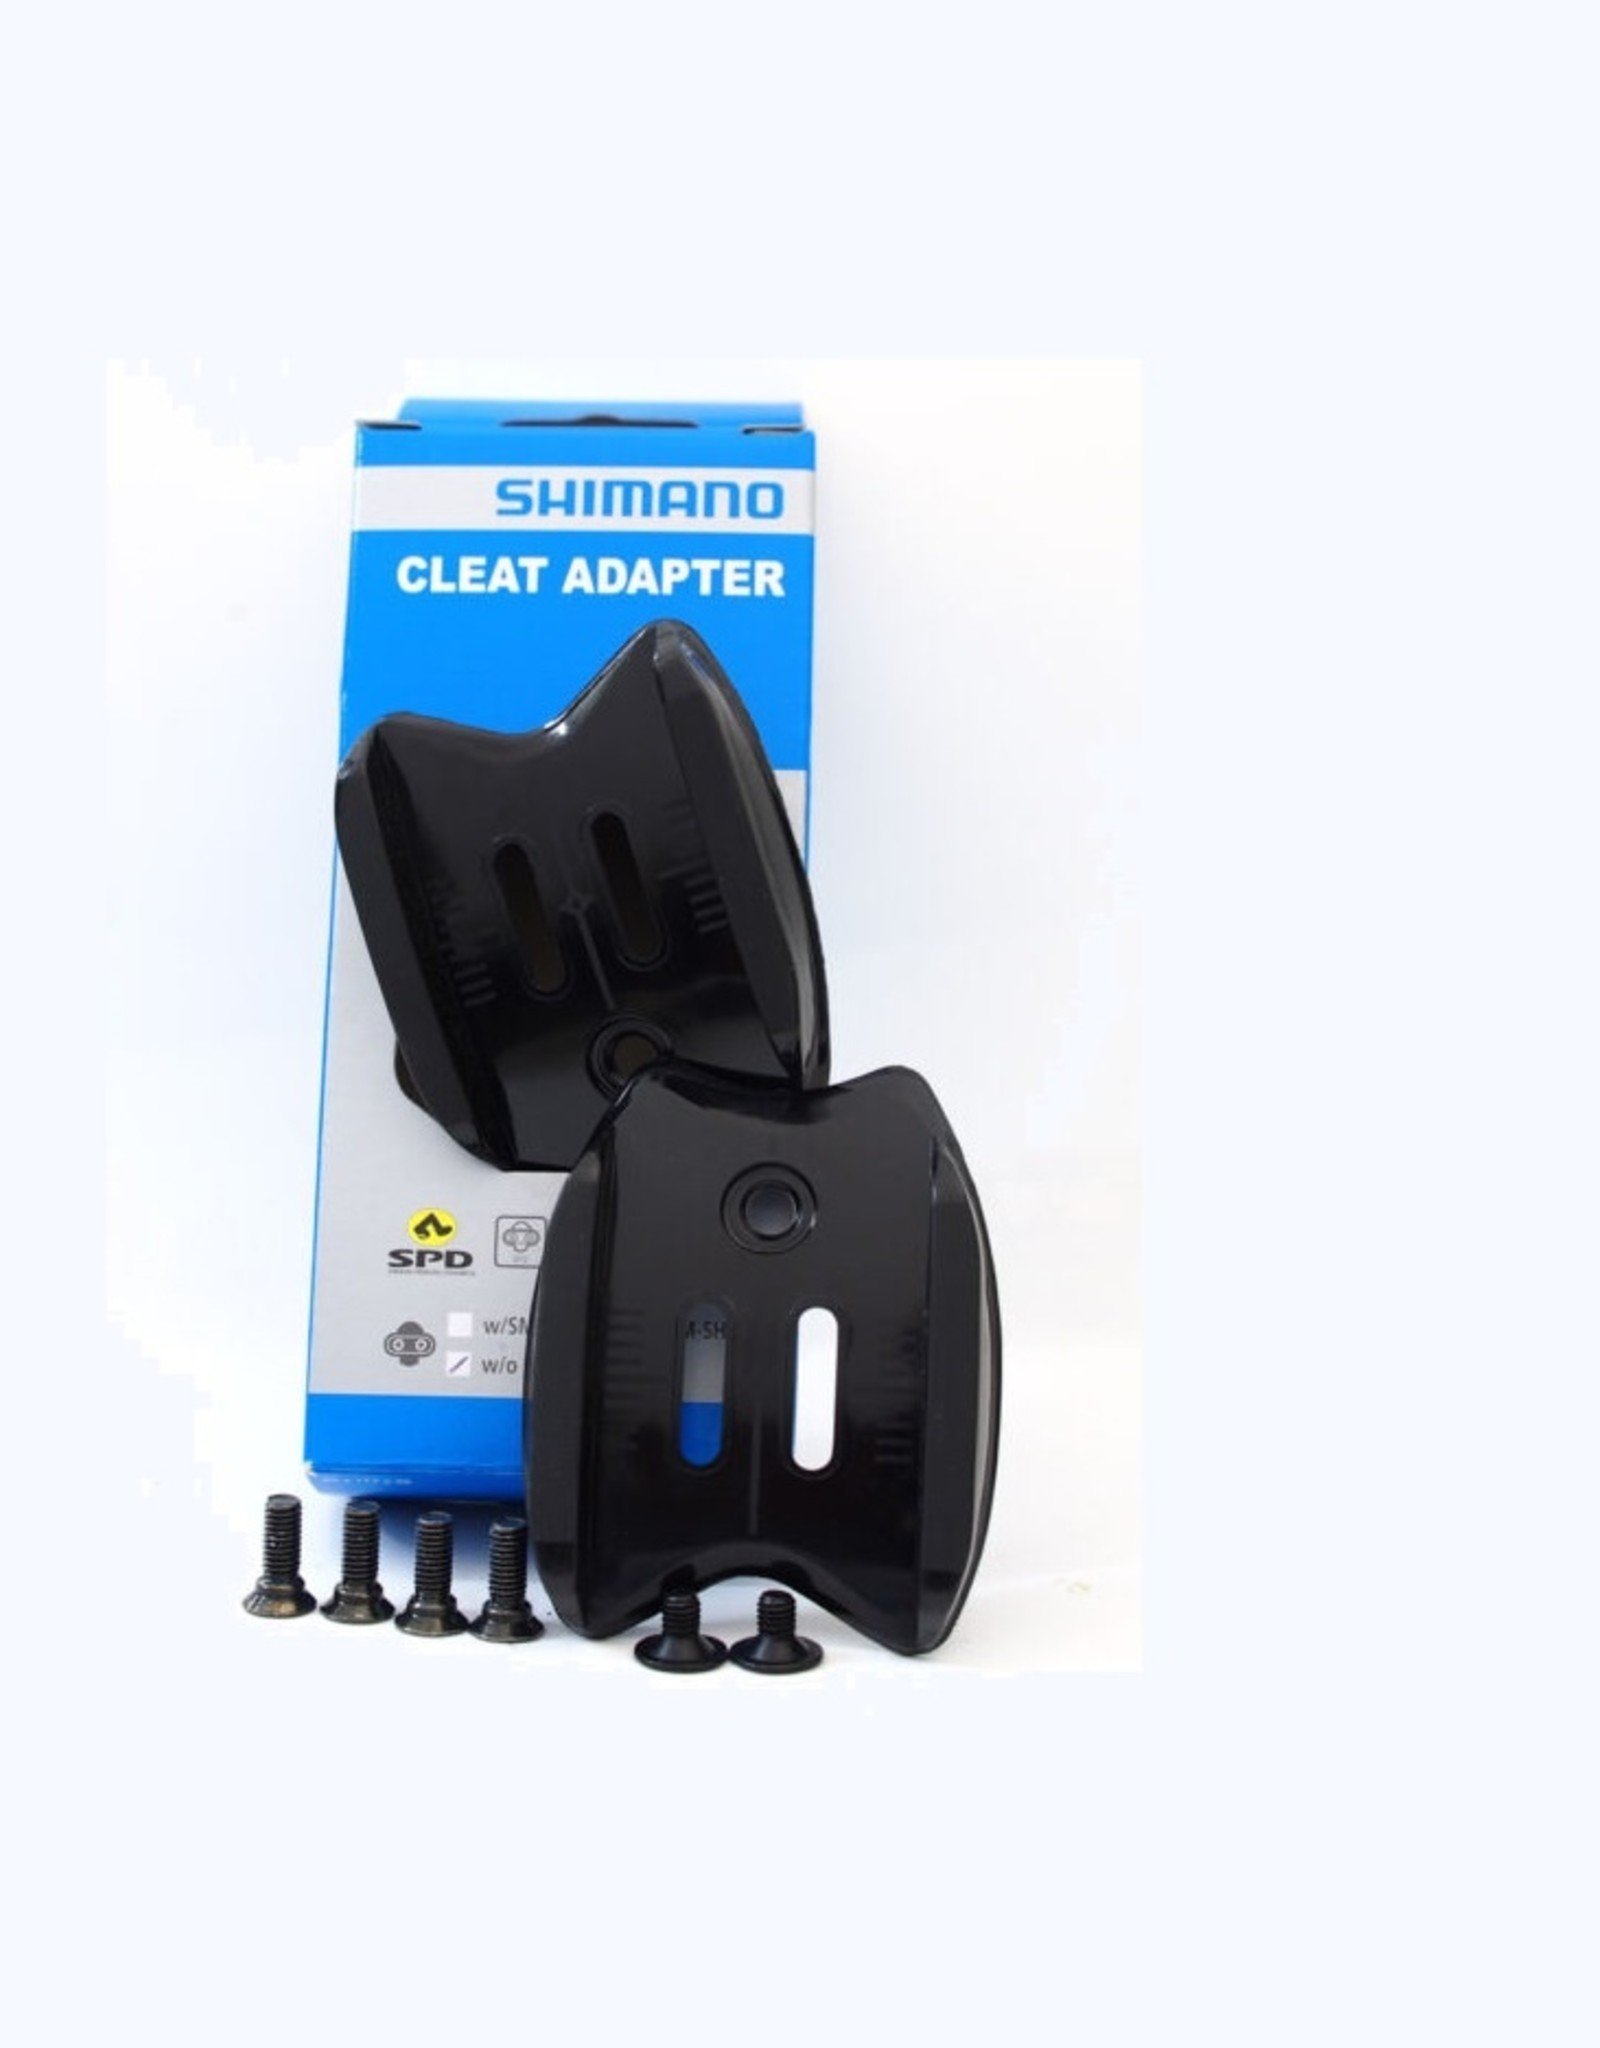 Shimano Cleat Adapter - Shimano SPD Cleat Adapter, SM-SH40, W/O Cleat